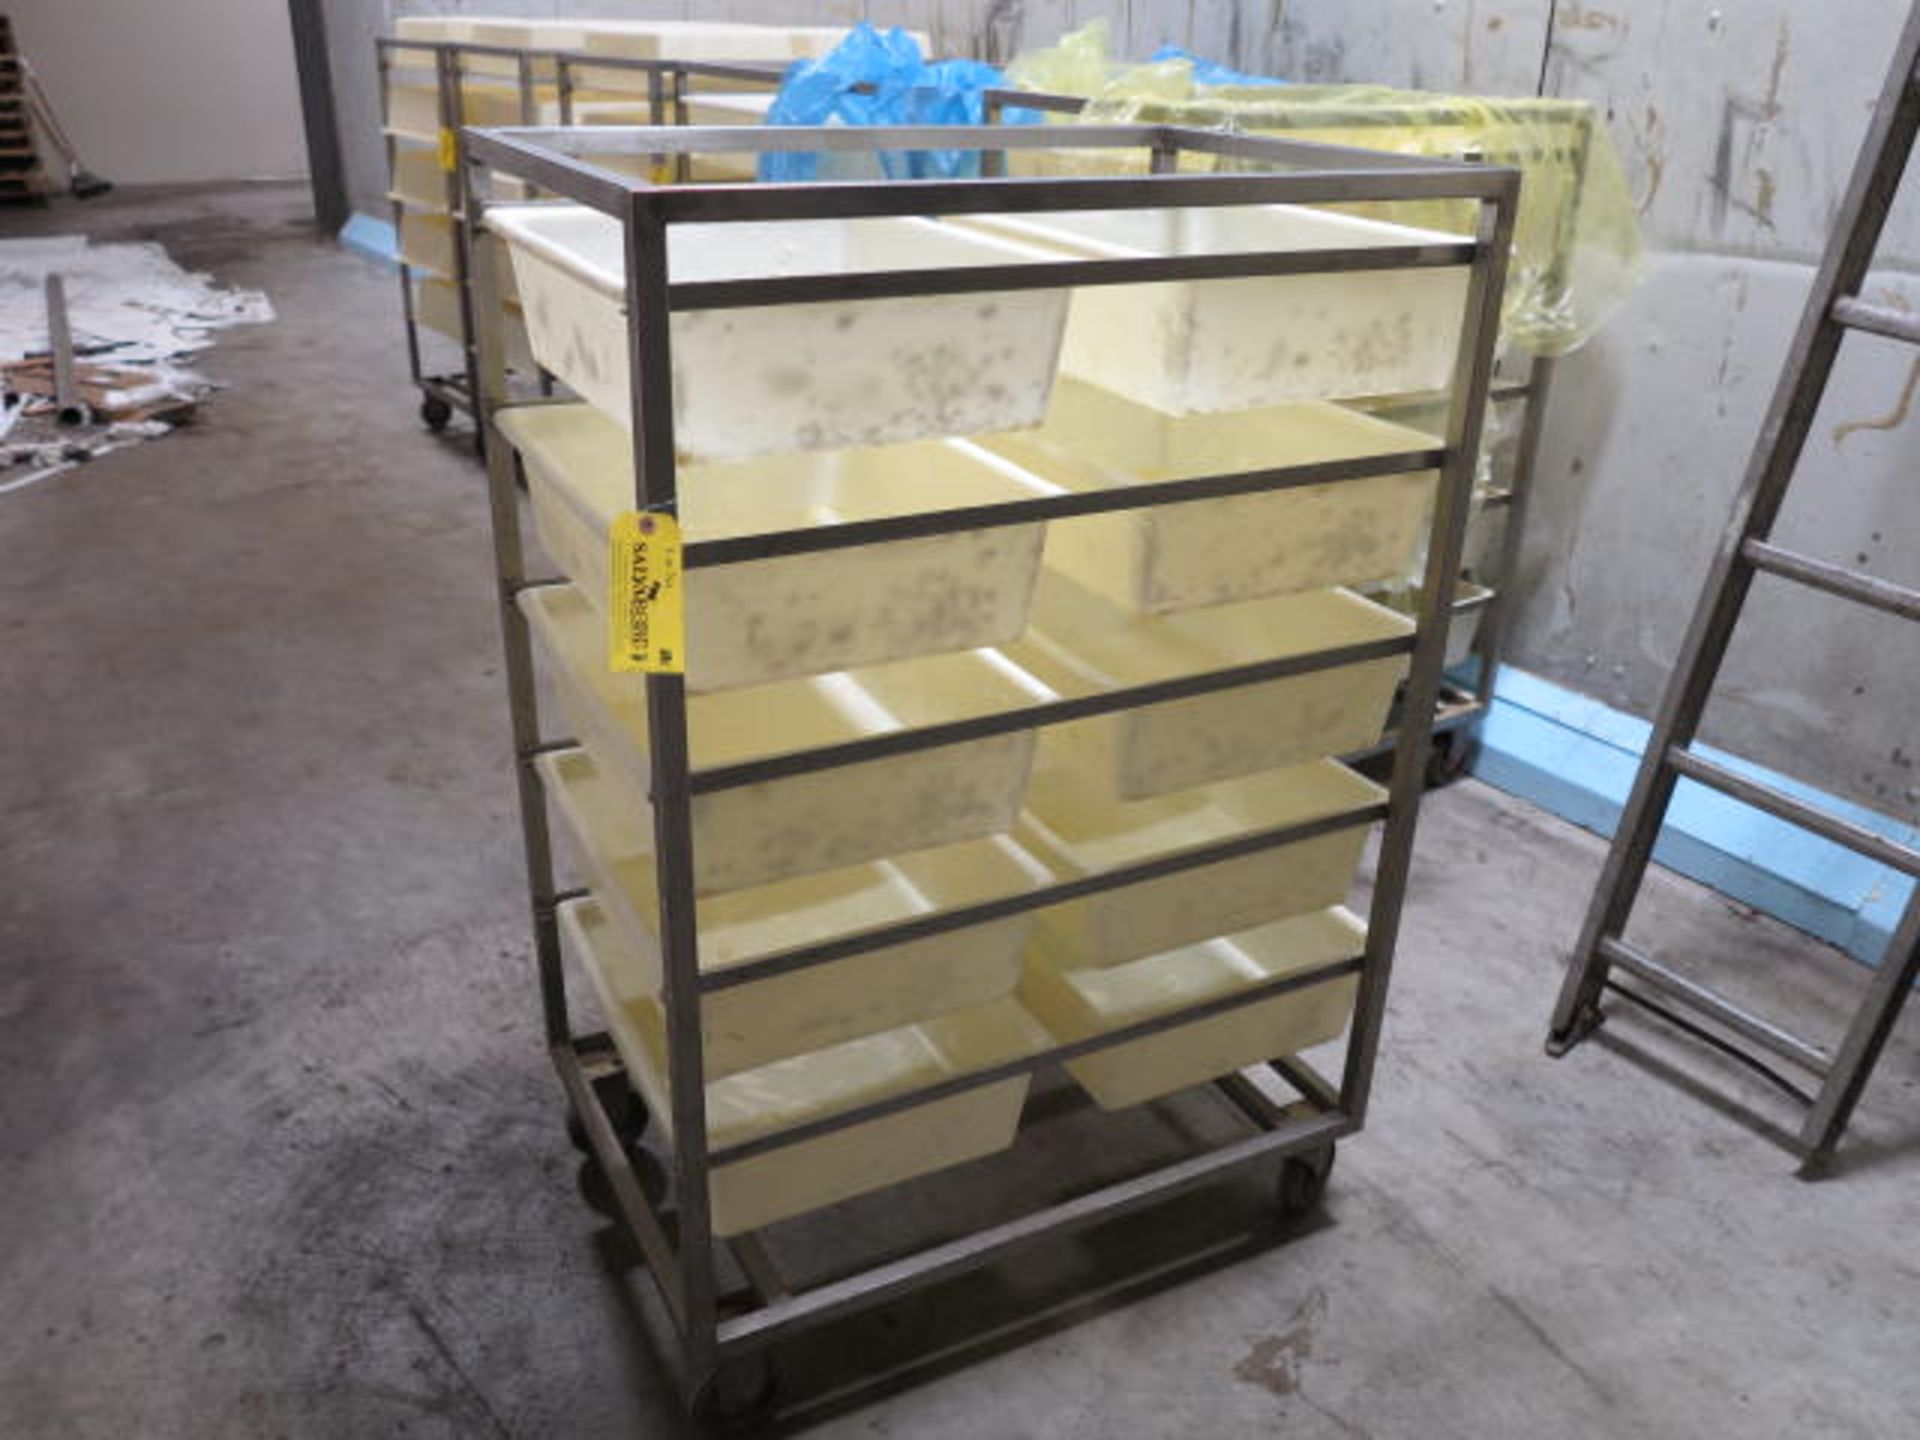 Stainless Steel 10 Tray Transport Carts 23" x 34" x 51" H